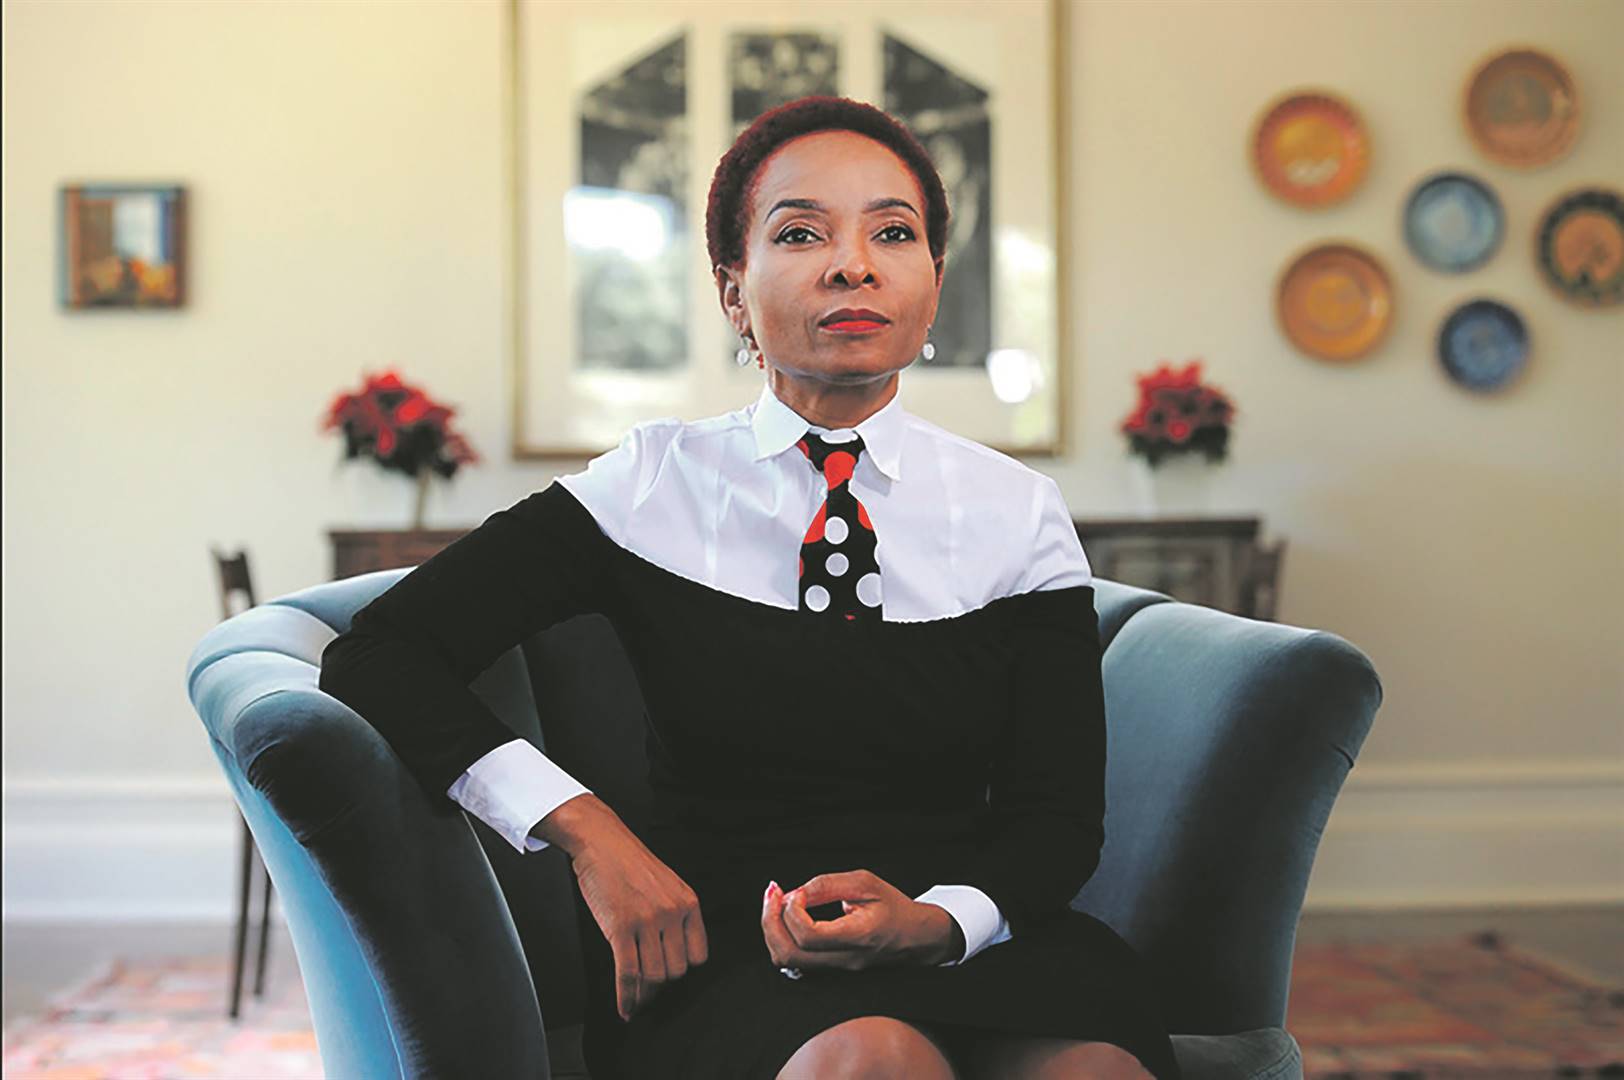 Former UCT vice-chancellor Professor Mamokgethi Phakeng used race to divide and bully staff at UCT, a recent report found.